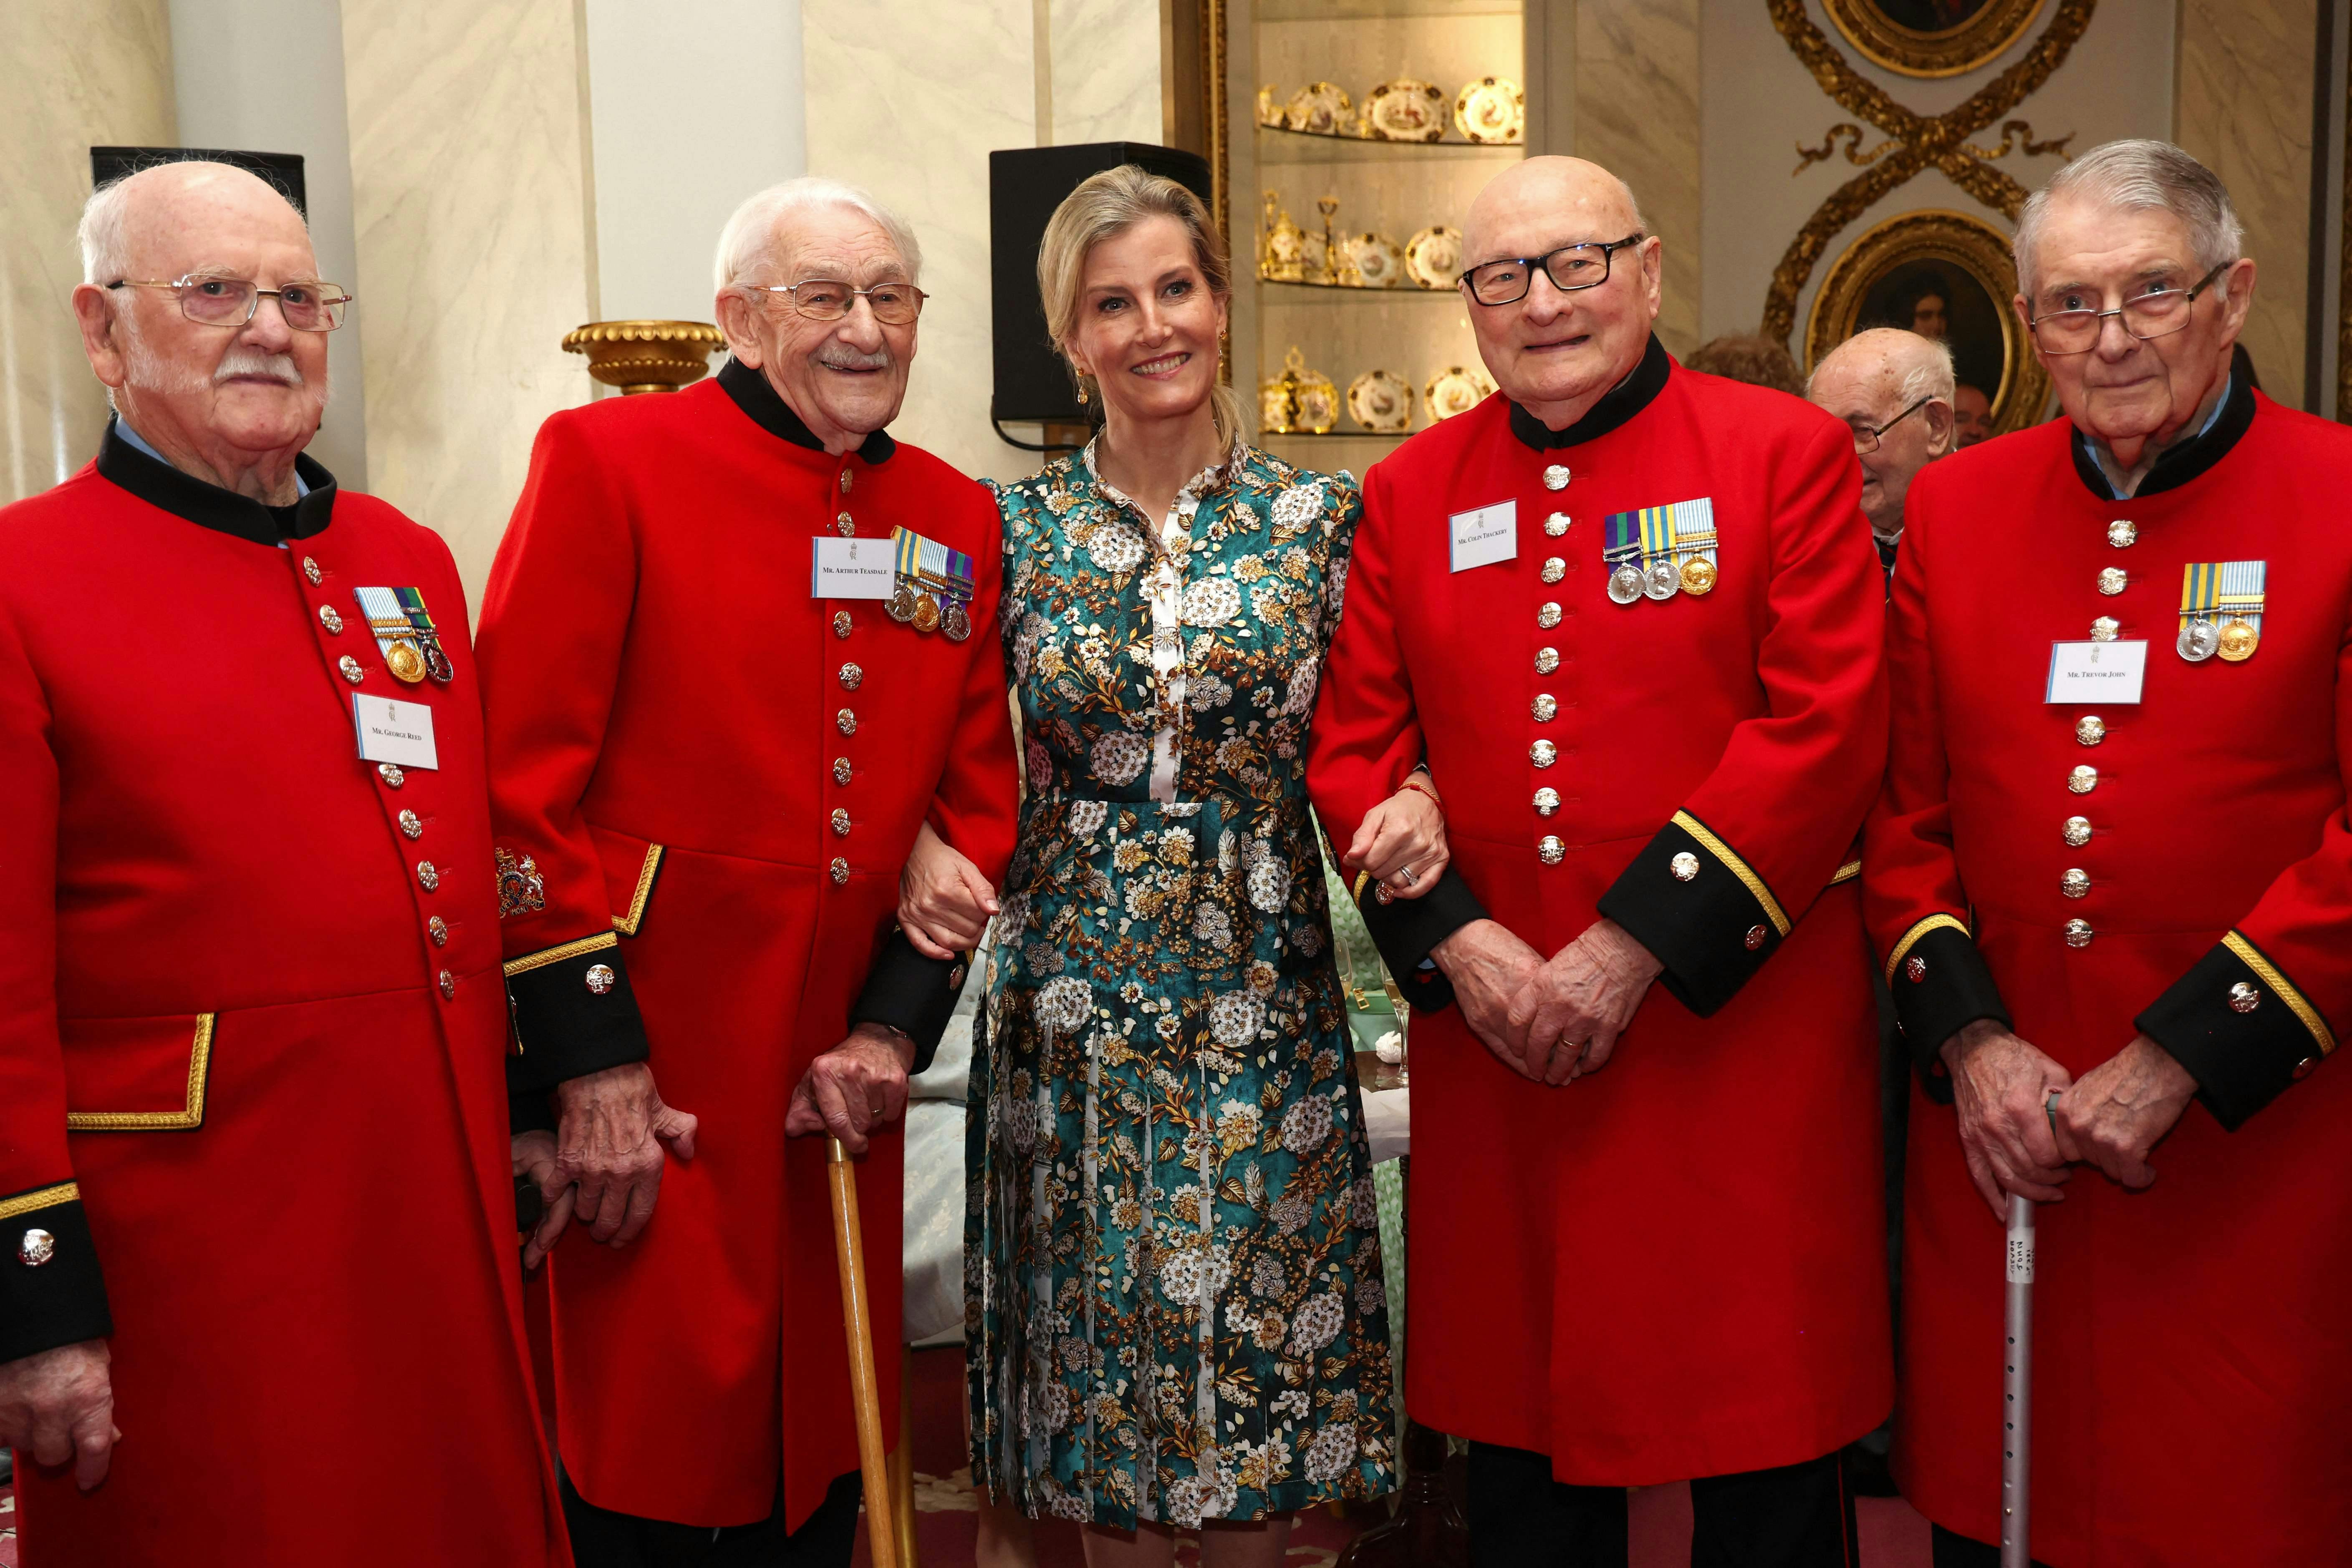 Britain's Sophie, Duchess of Edinburgh poses for a picture with Chelsea Pensioners during a reception for Korean war veterans, to mark the 70th anniversary of the Korean War, which she hosted on behalf of Britain's King Charles III at Buckingham Palace in central London on March 19, 2024. (Photo by Tristan Fewings / POOL / AFP)